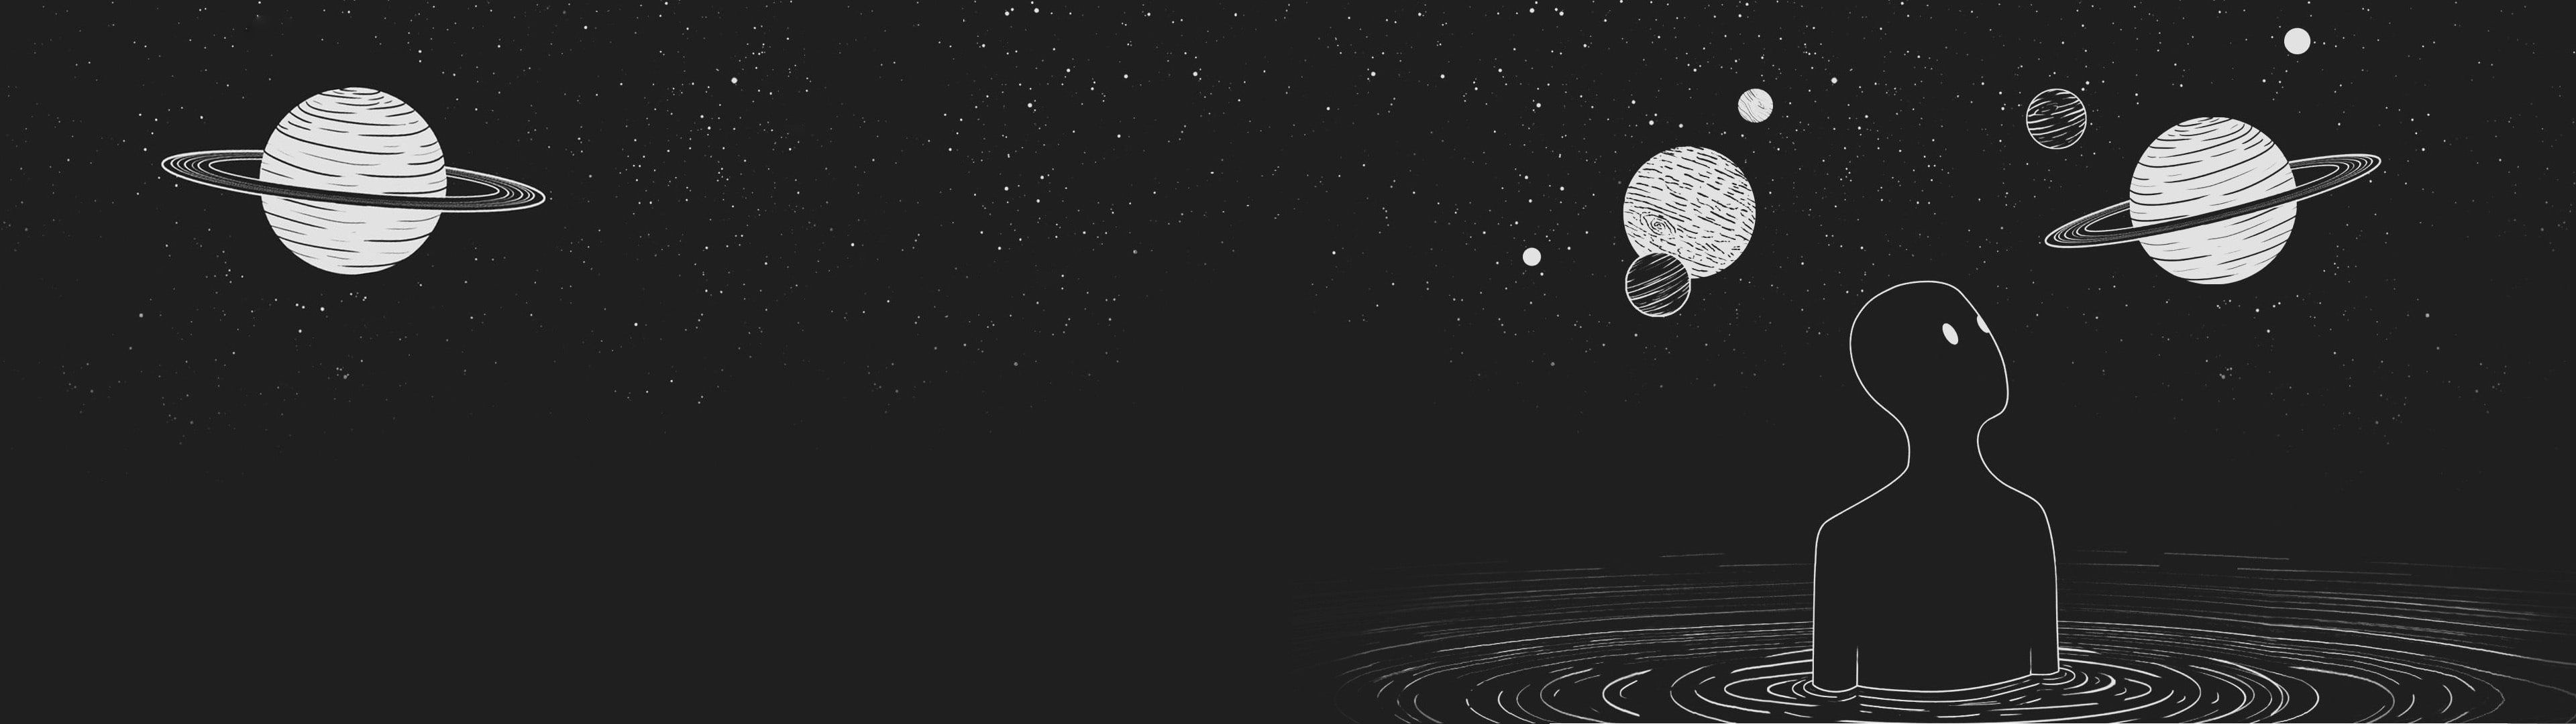 3840x1080 abstract #minimalism #space #planet #surreal space art #monochrome #4K # wallpaper #hdwallpaper #desktop | Space art, Hd wallpaper, Wallpaper